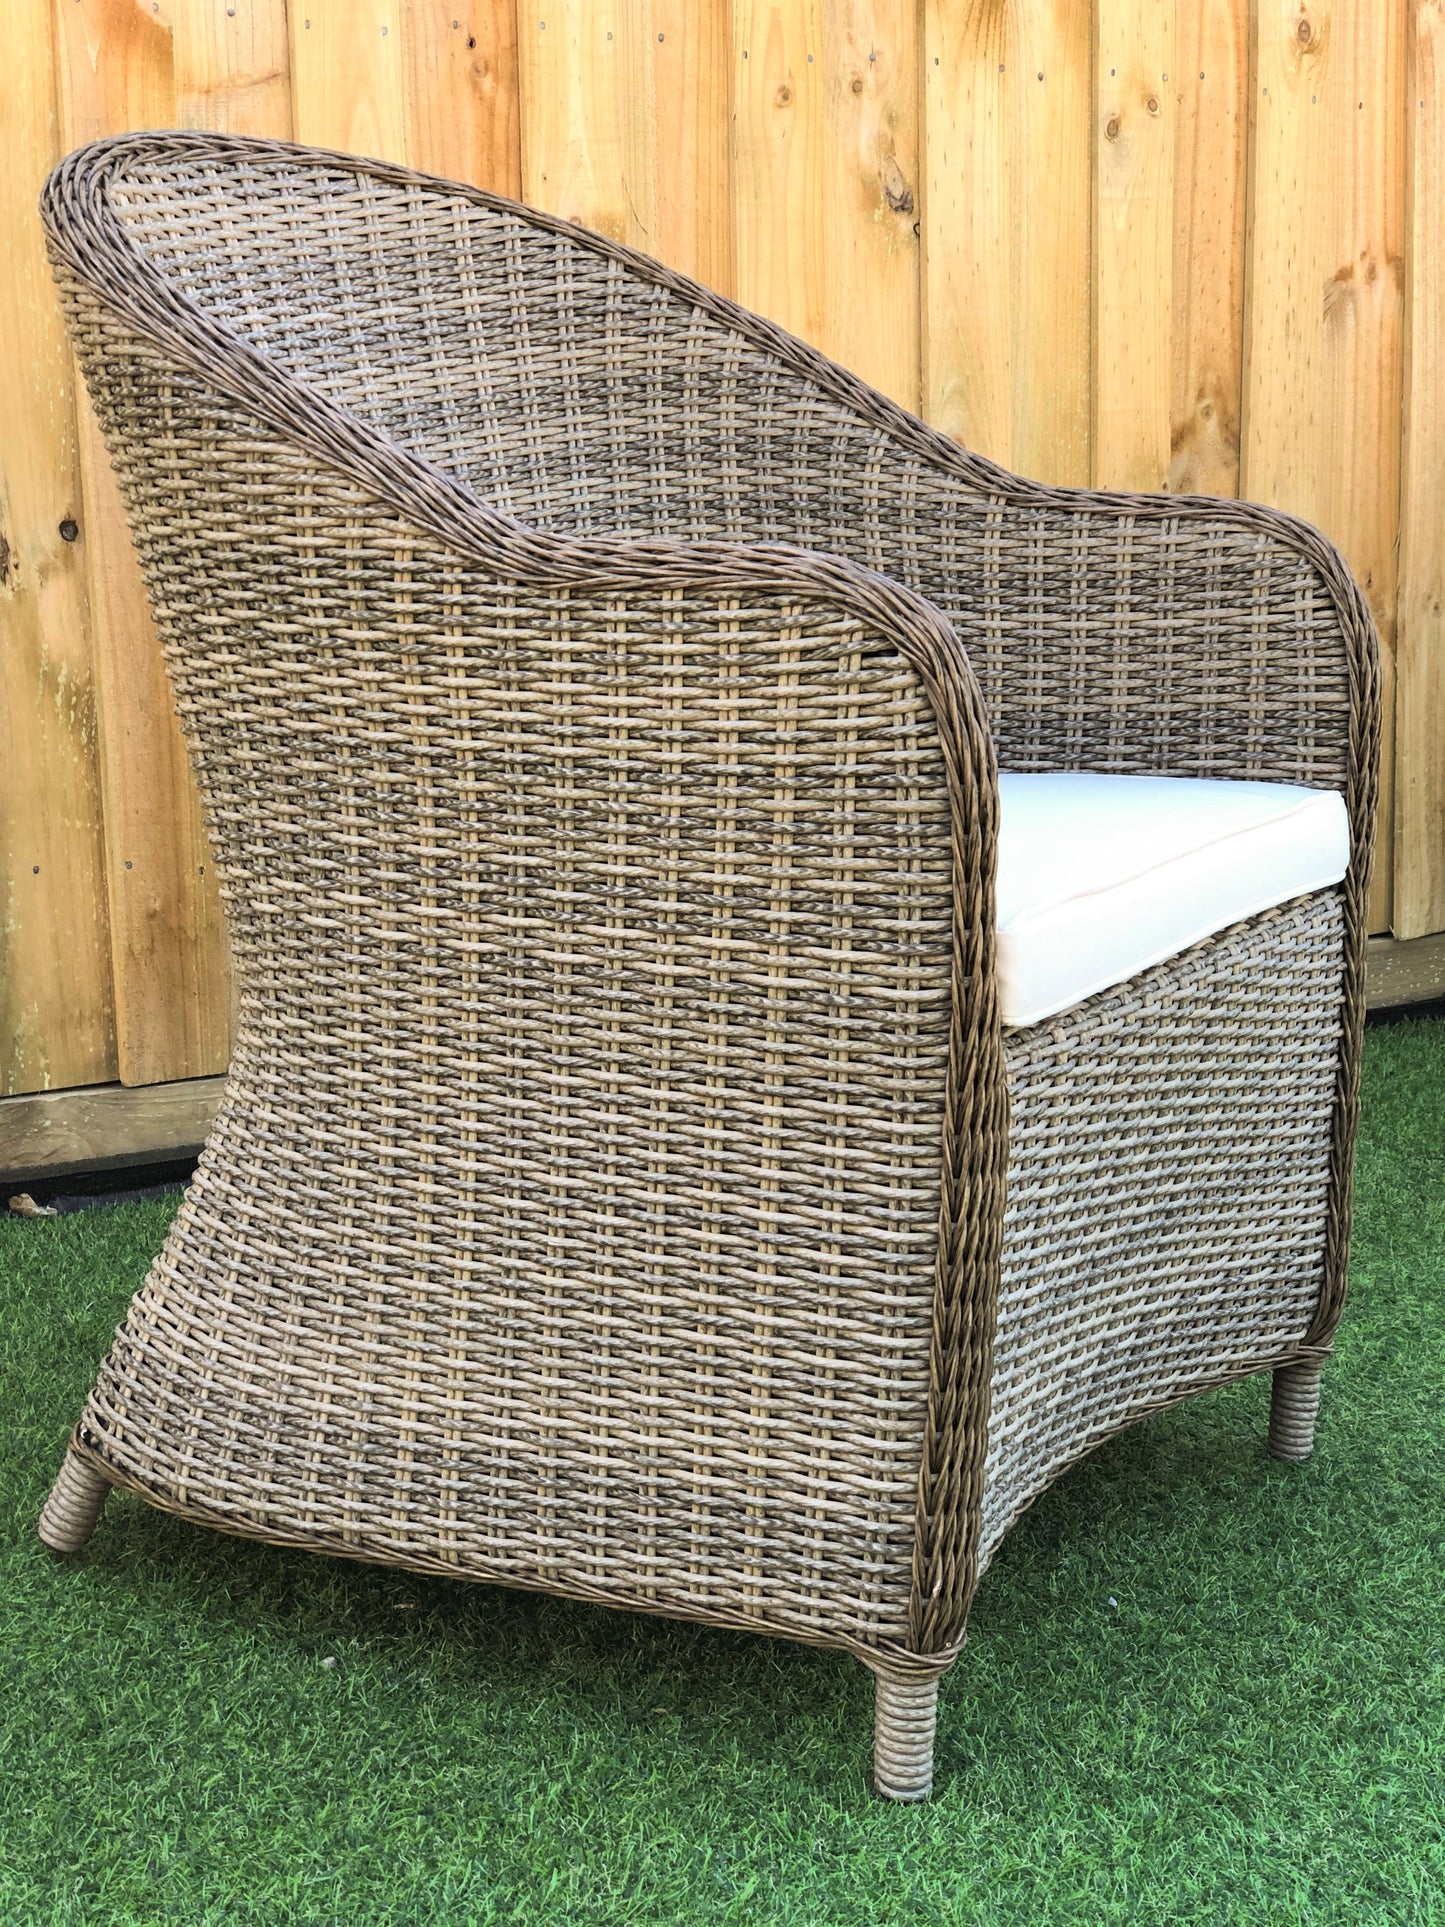 PECAN Poly Rattan Wicker Outdoor Dining Chair - Brown - Direct Factory Furniture Australia